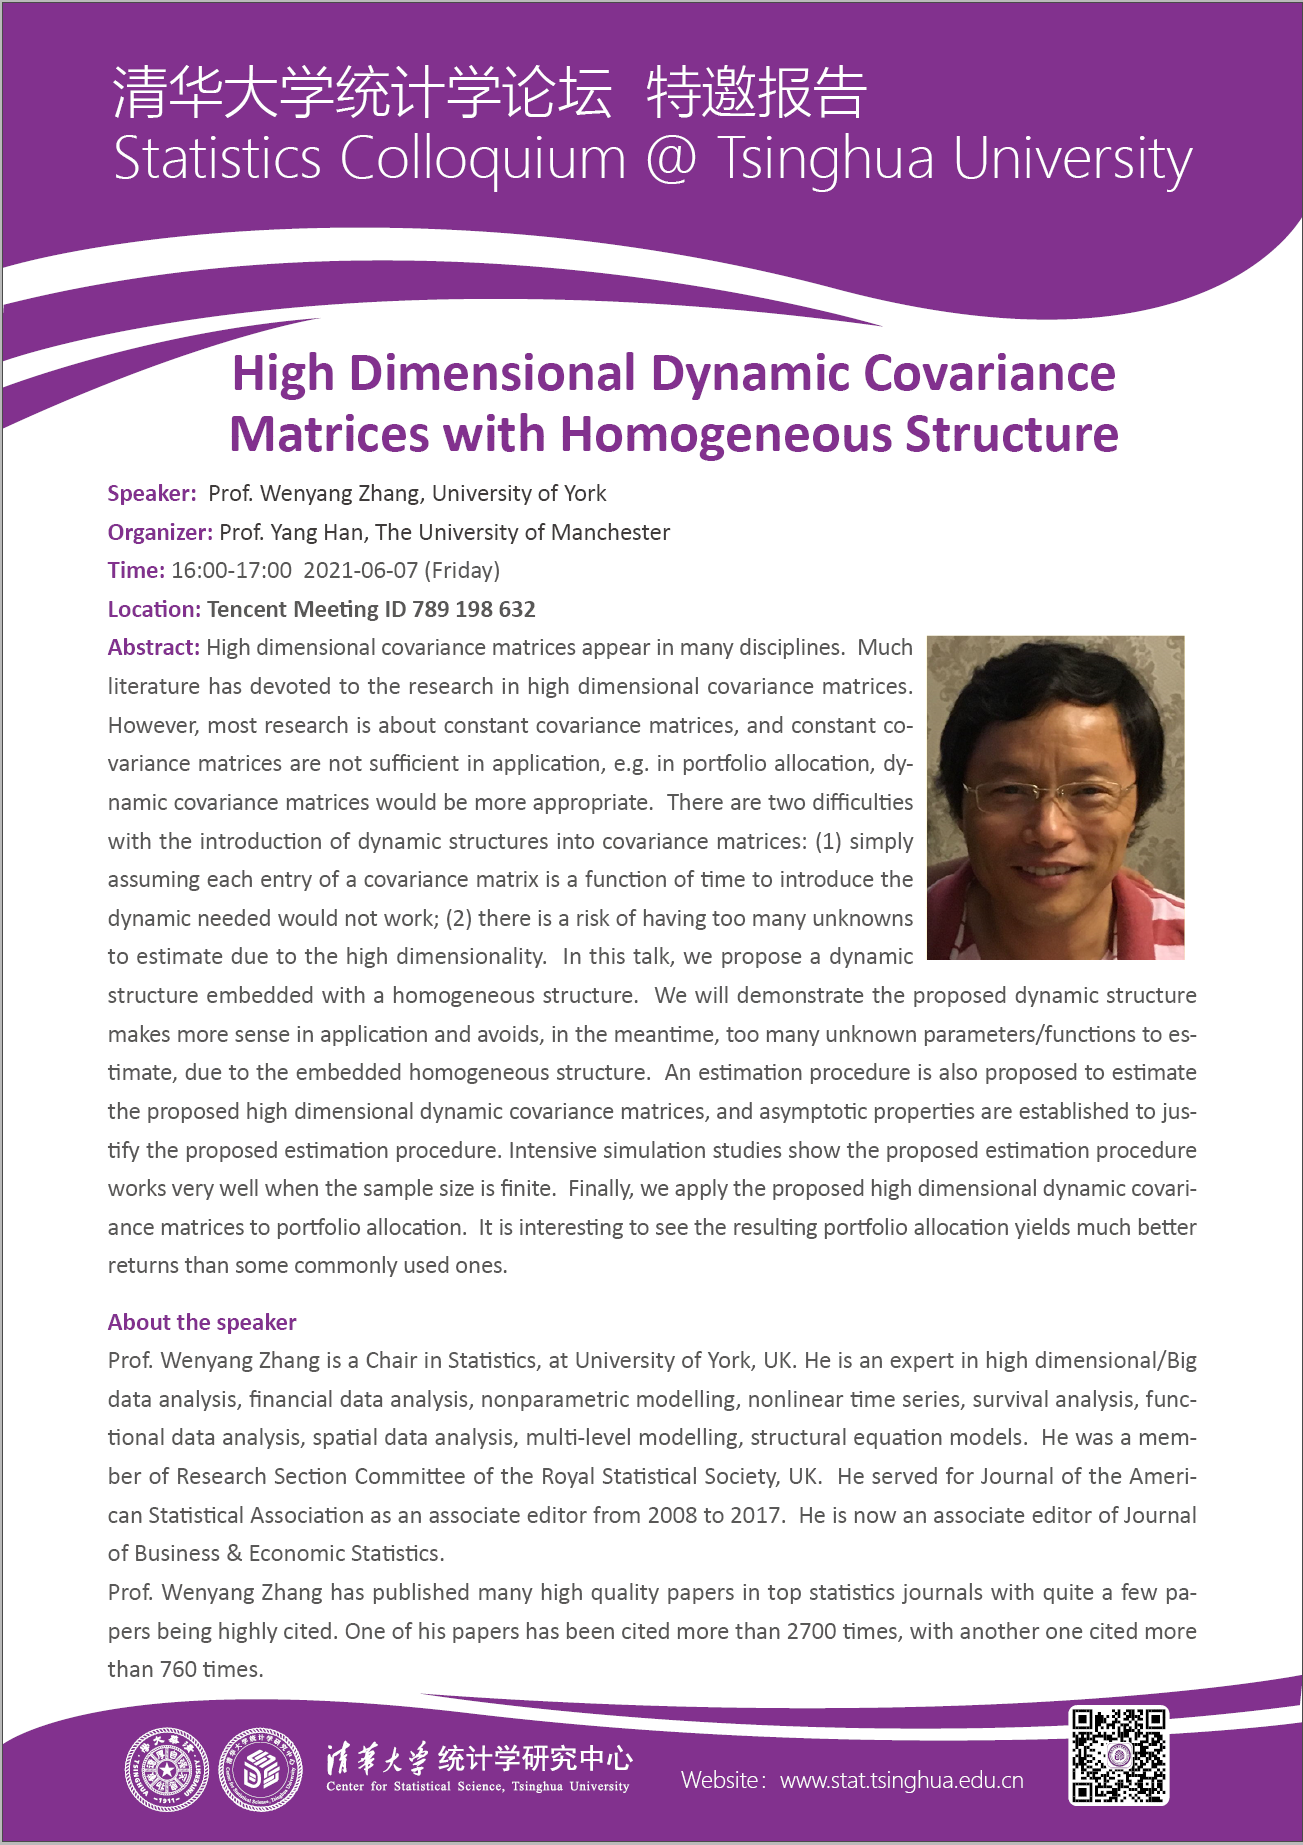 High Dimensional Dynamic Covariance Matrices with Homogeneous Structure